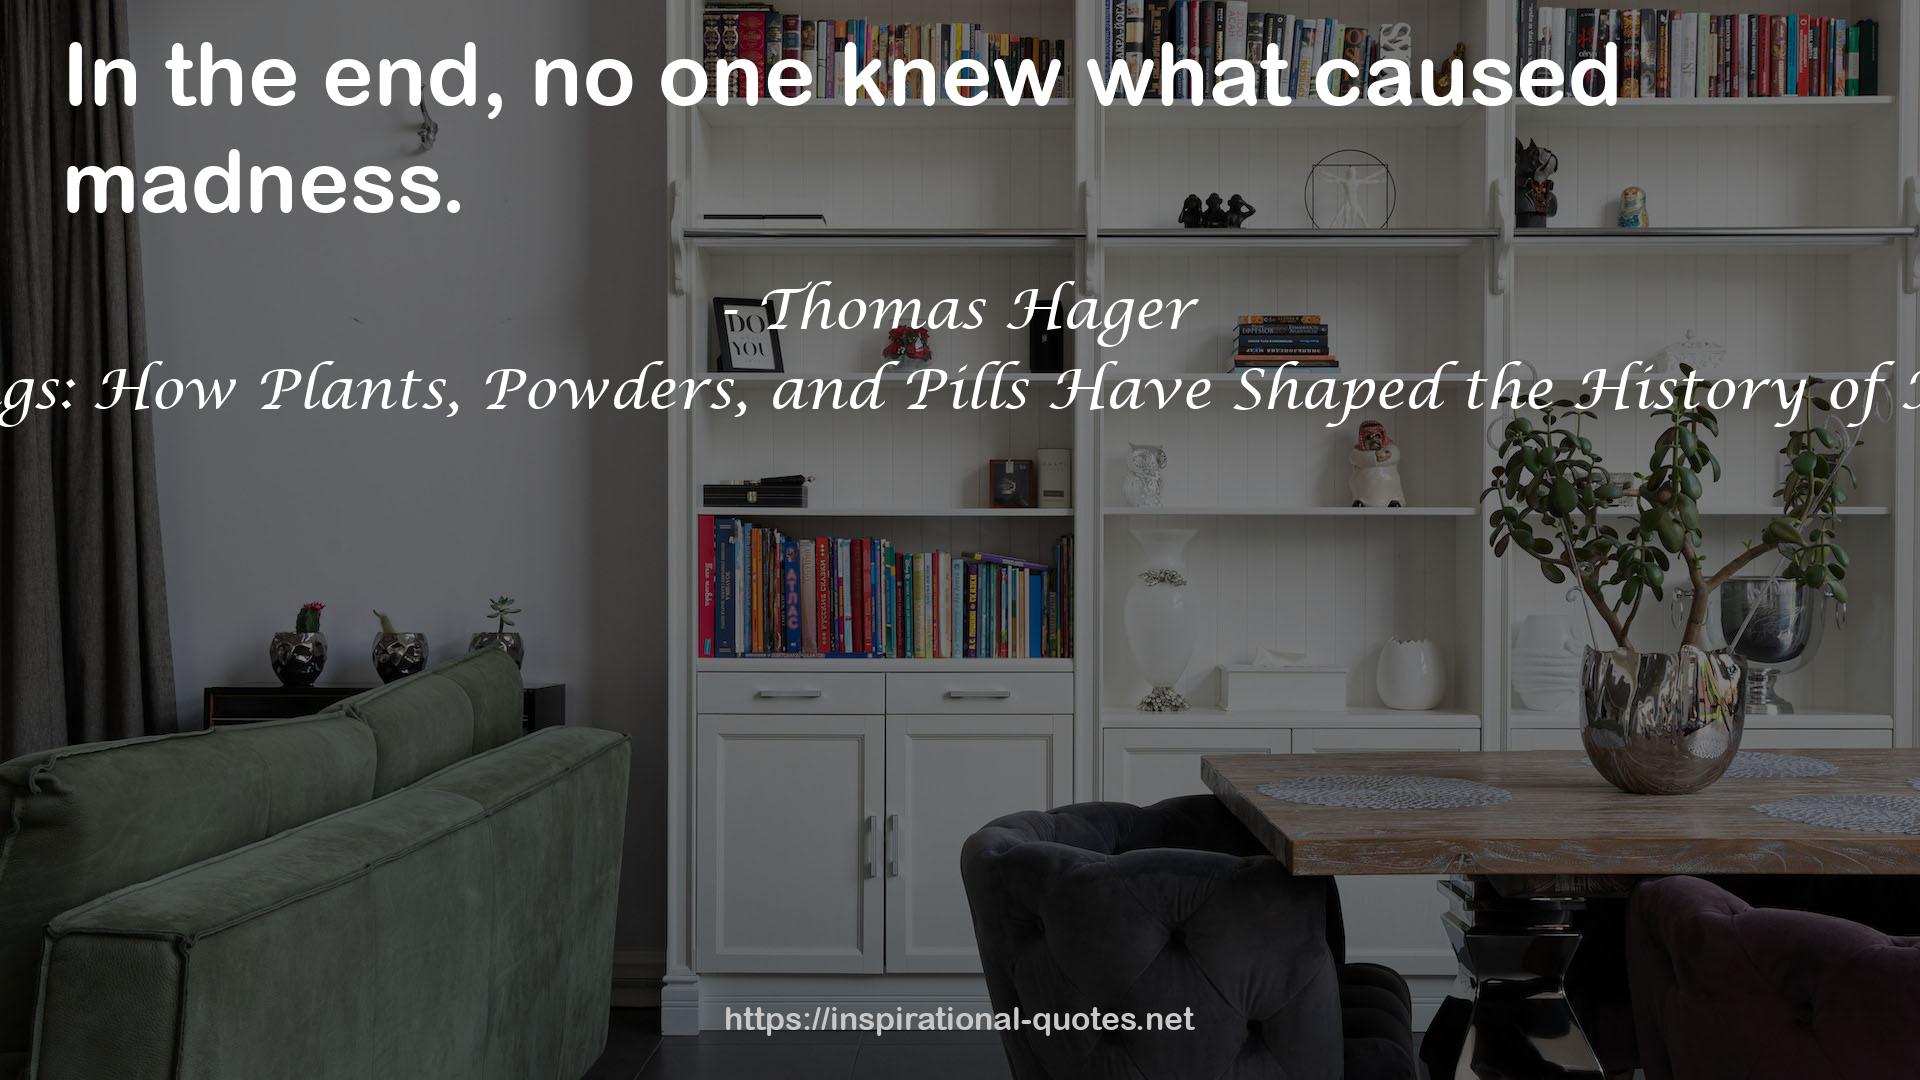 Ten Drugs: How Plants, Powders, and Pills Have Shaped the History of Medicine QUOTES